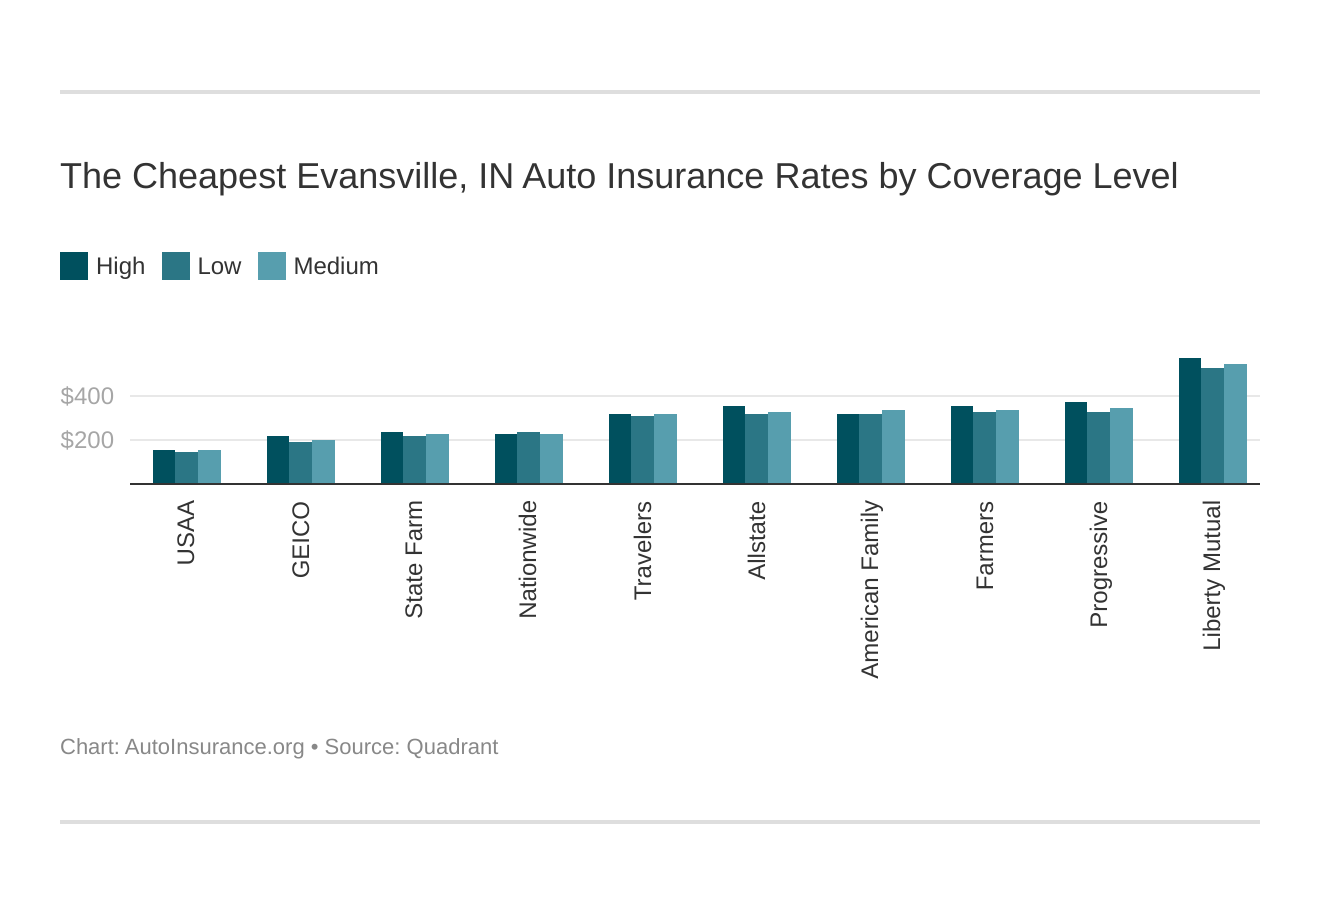 The Cheapest Evansville, IN Auto Insurance Rates by Coverage Level